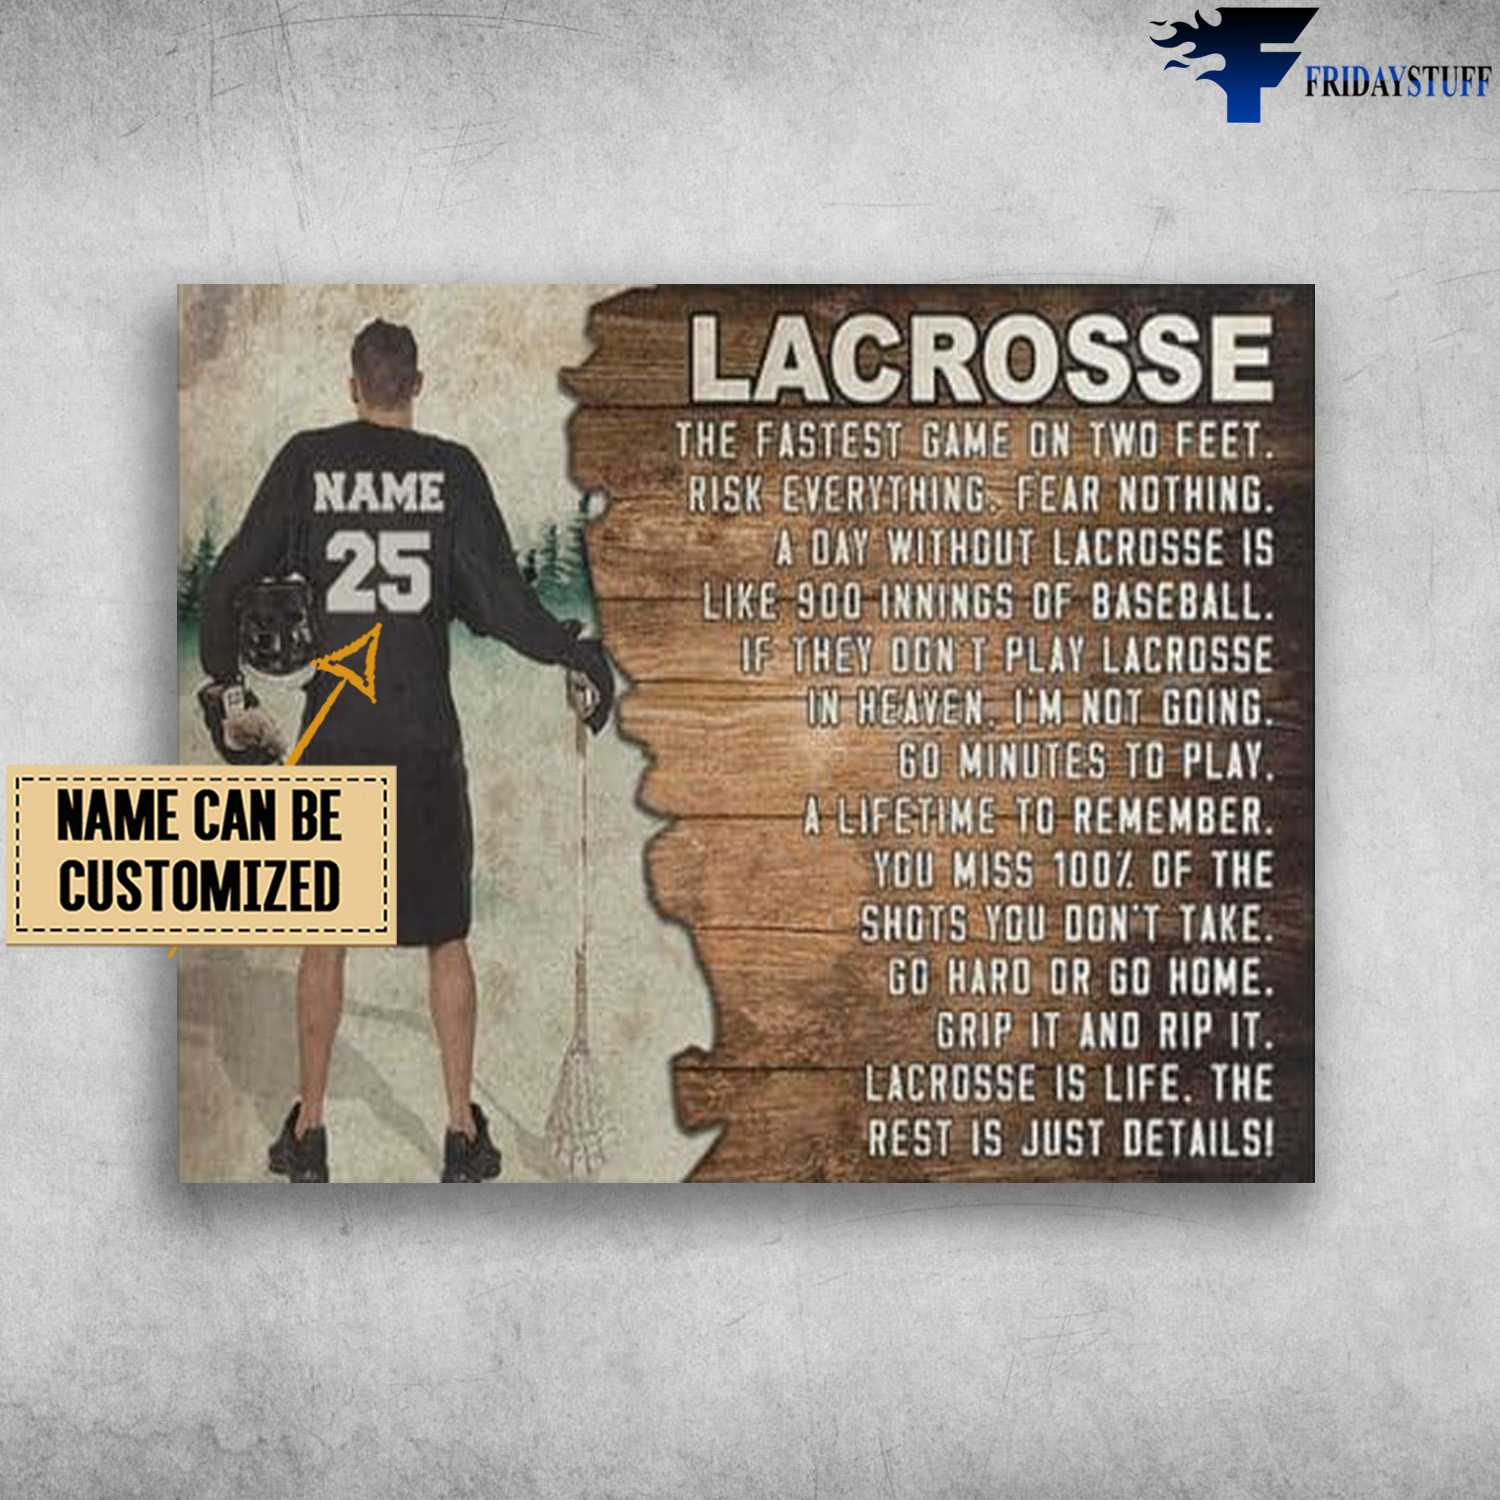 Lacrosse Poster, Lacrosse Decor, The Fastest Game On Two Feet, Risk Everything, Fear Nothing, A Day Withour Lacrosse Is, Like 900 Innings Of Baseball